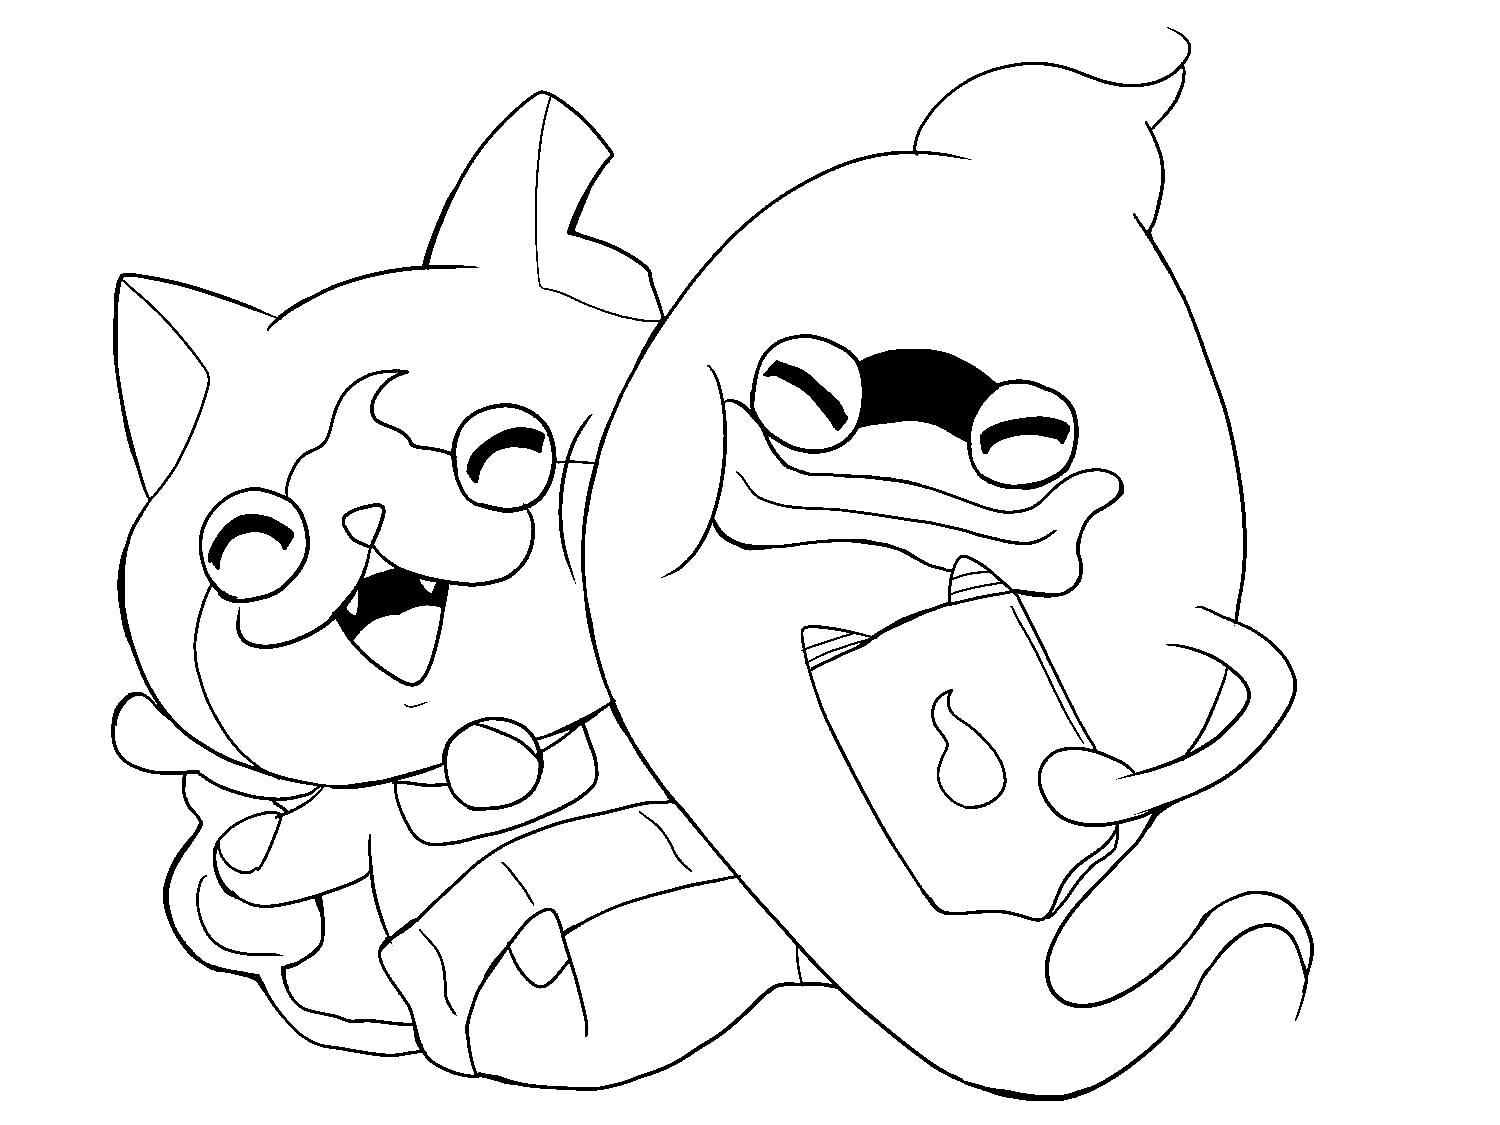 Jibanyan with Whisper Coloring Pages